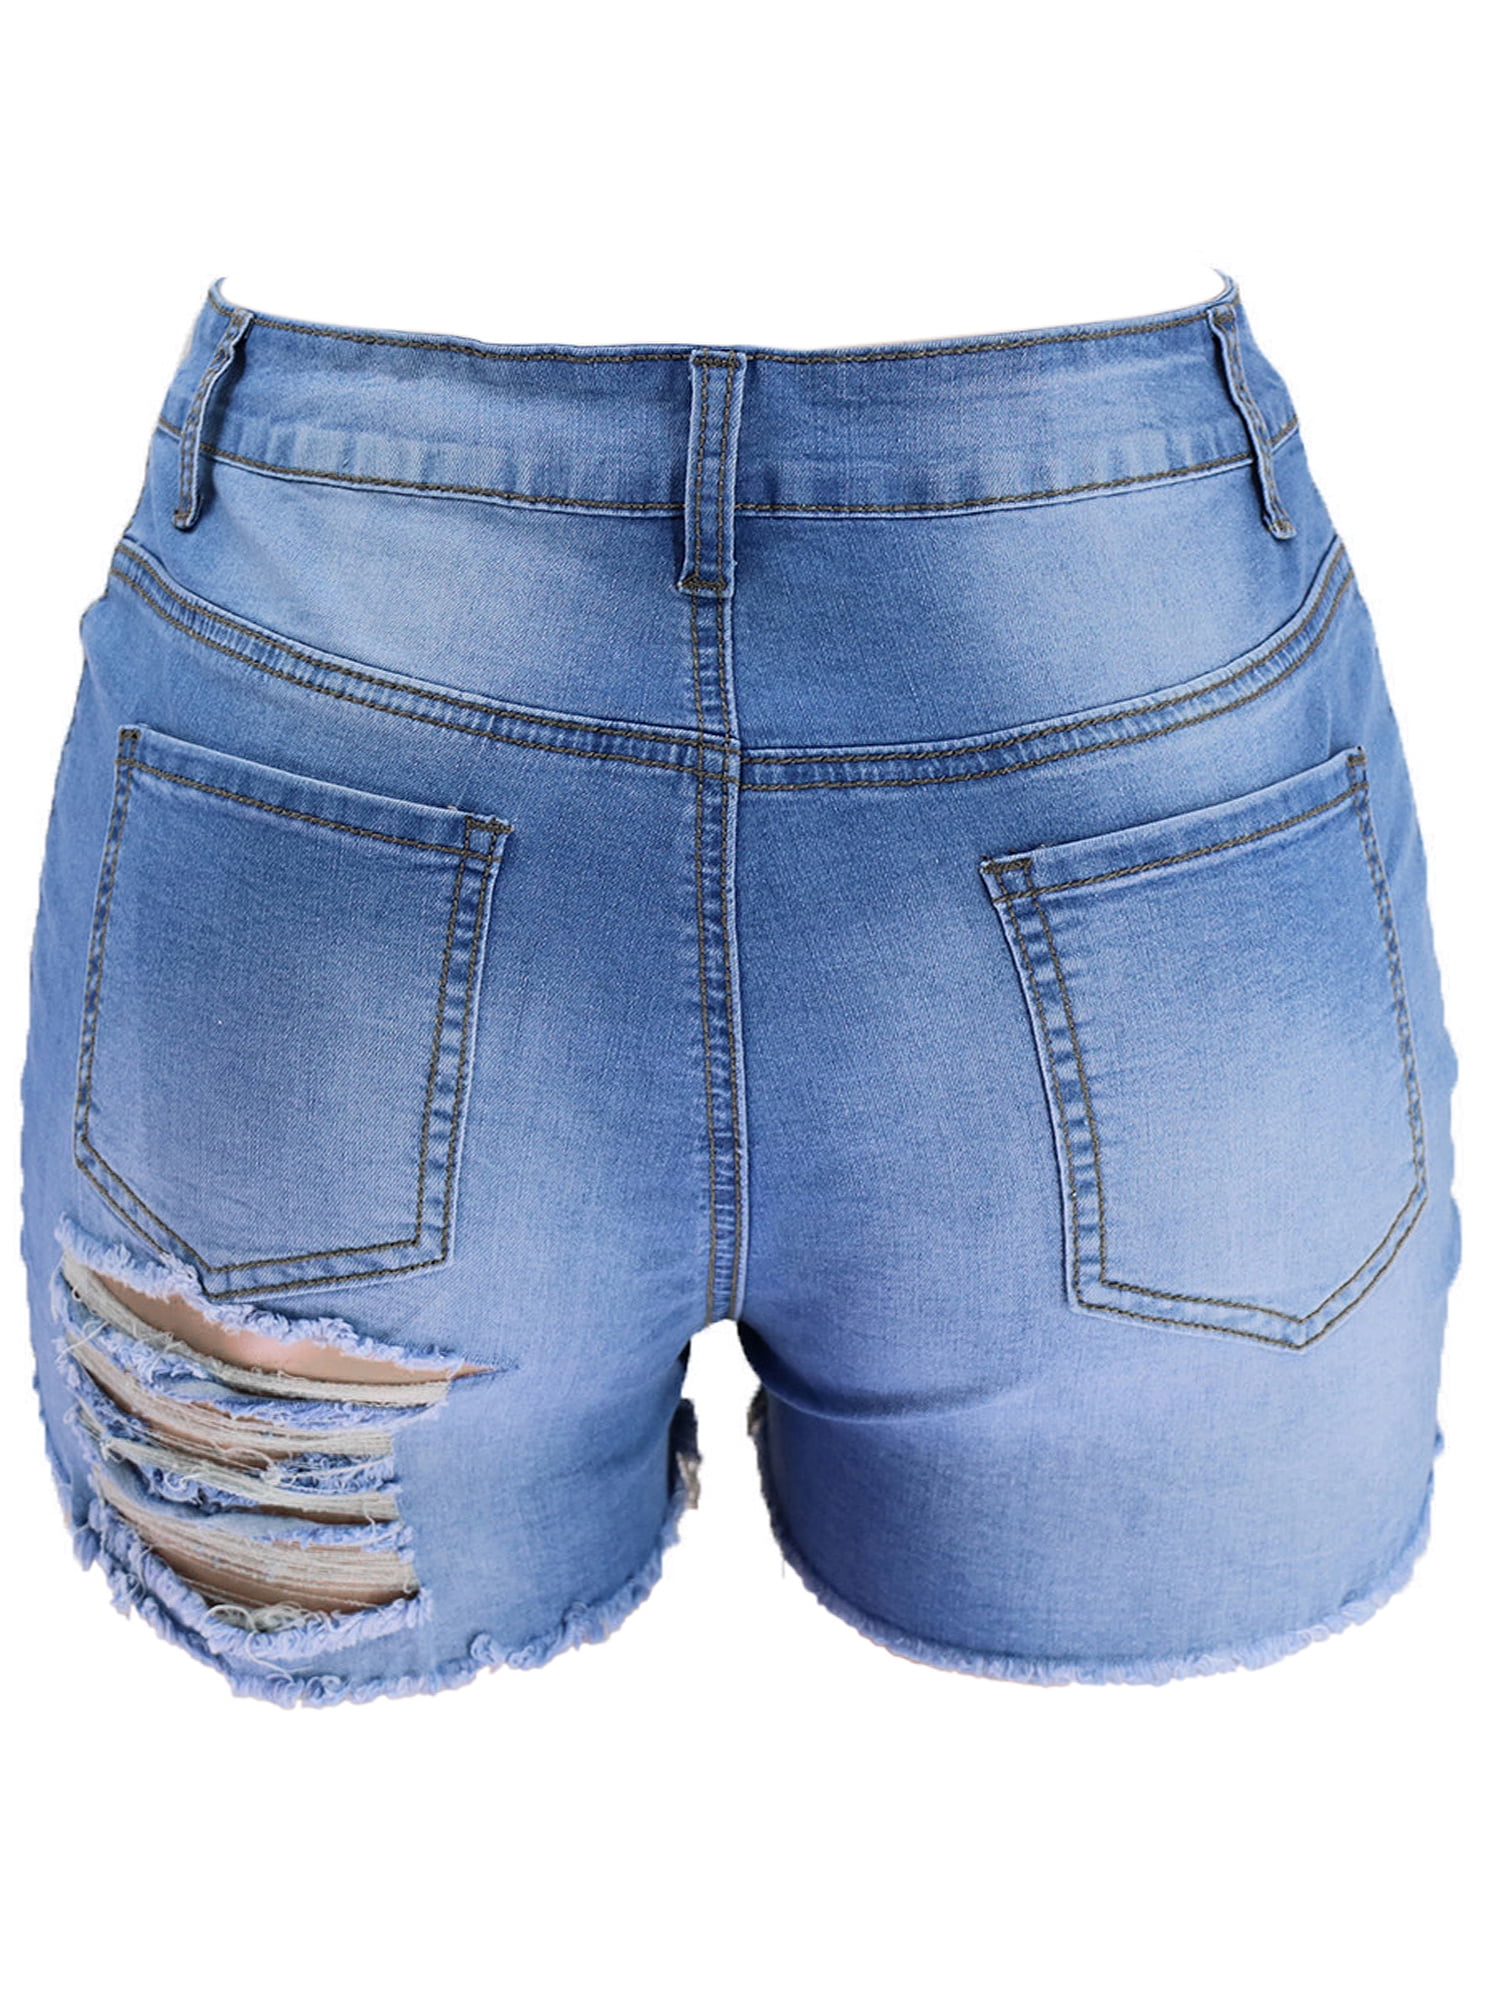 Blue Denim High Waisted Shorts Women's Elastic Jeans Shorts Cowgirl Western Style Clothing Mini Hotpants Gift for Her Size Small